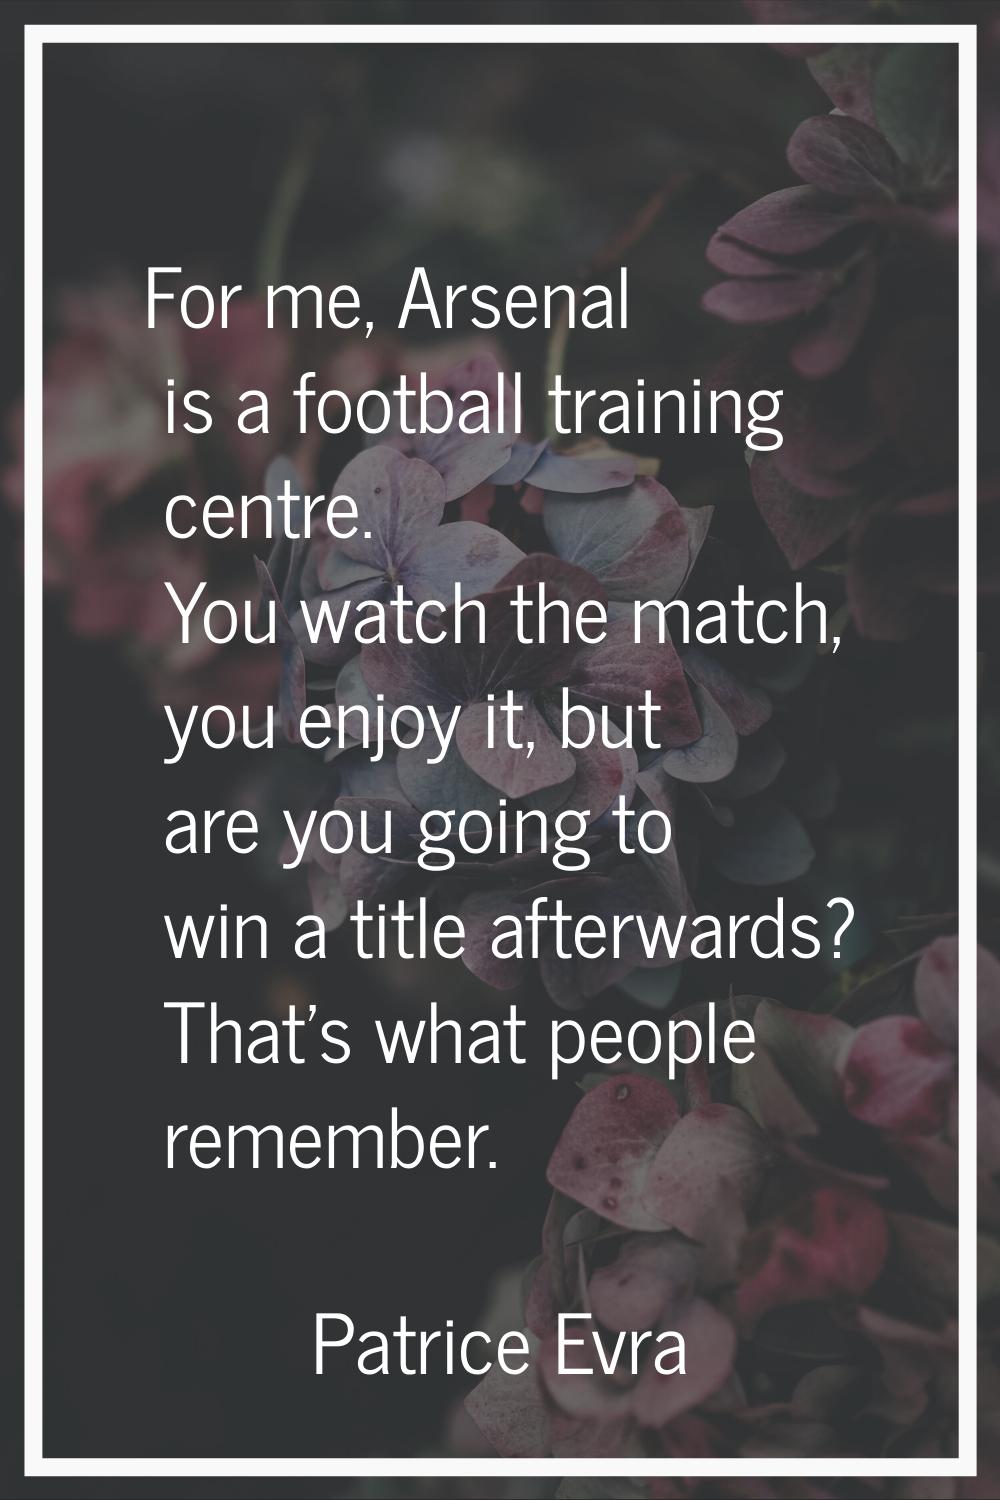 For me, Arsenal is a football training centre. You watch the match, you enjoy it, but are you going